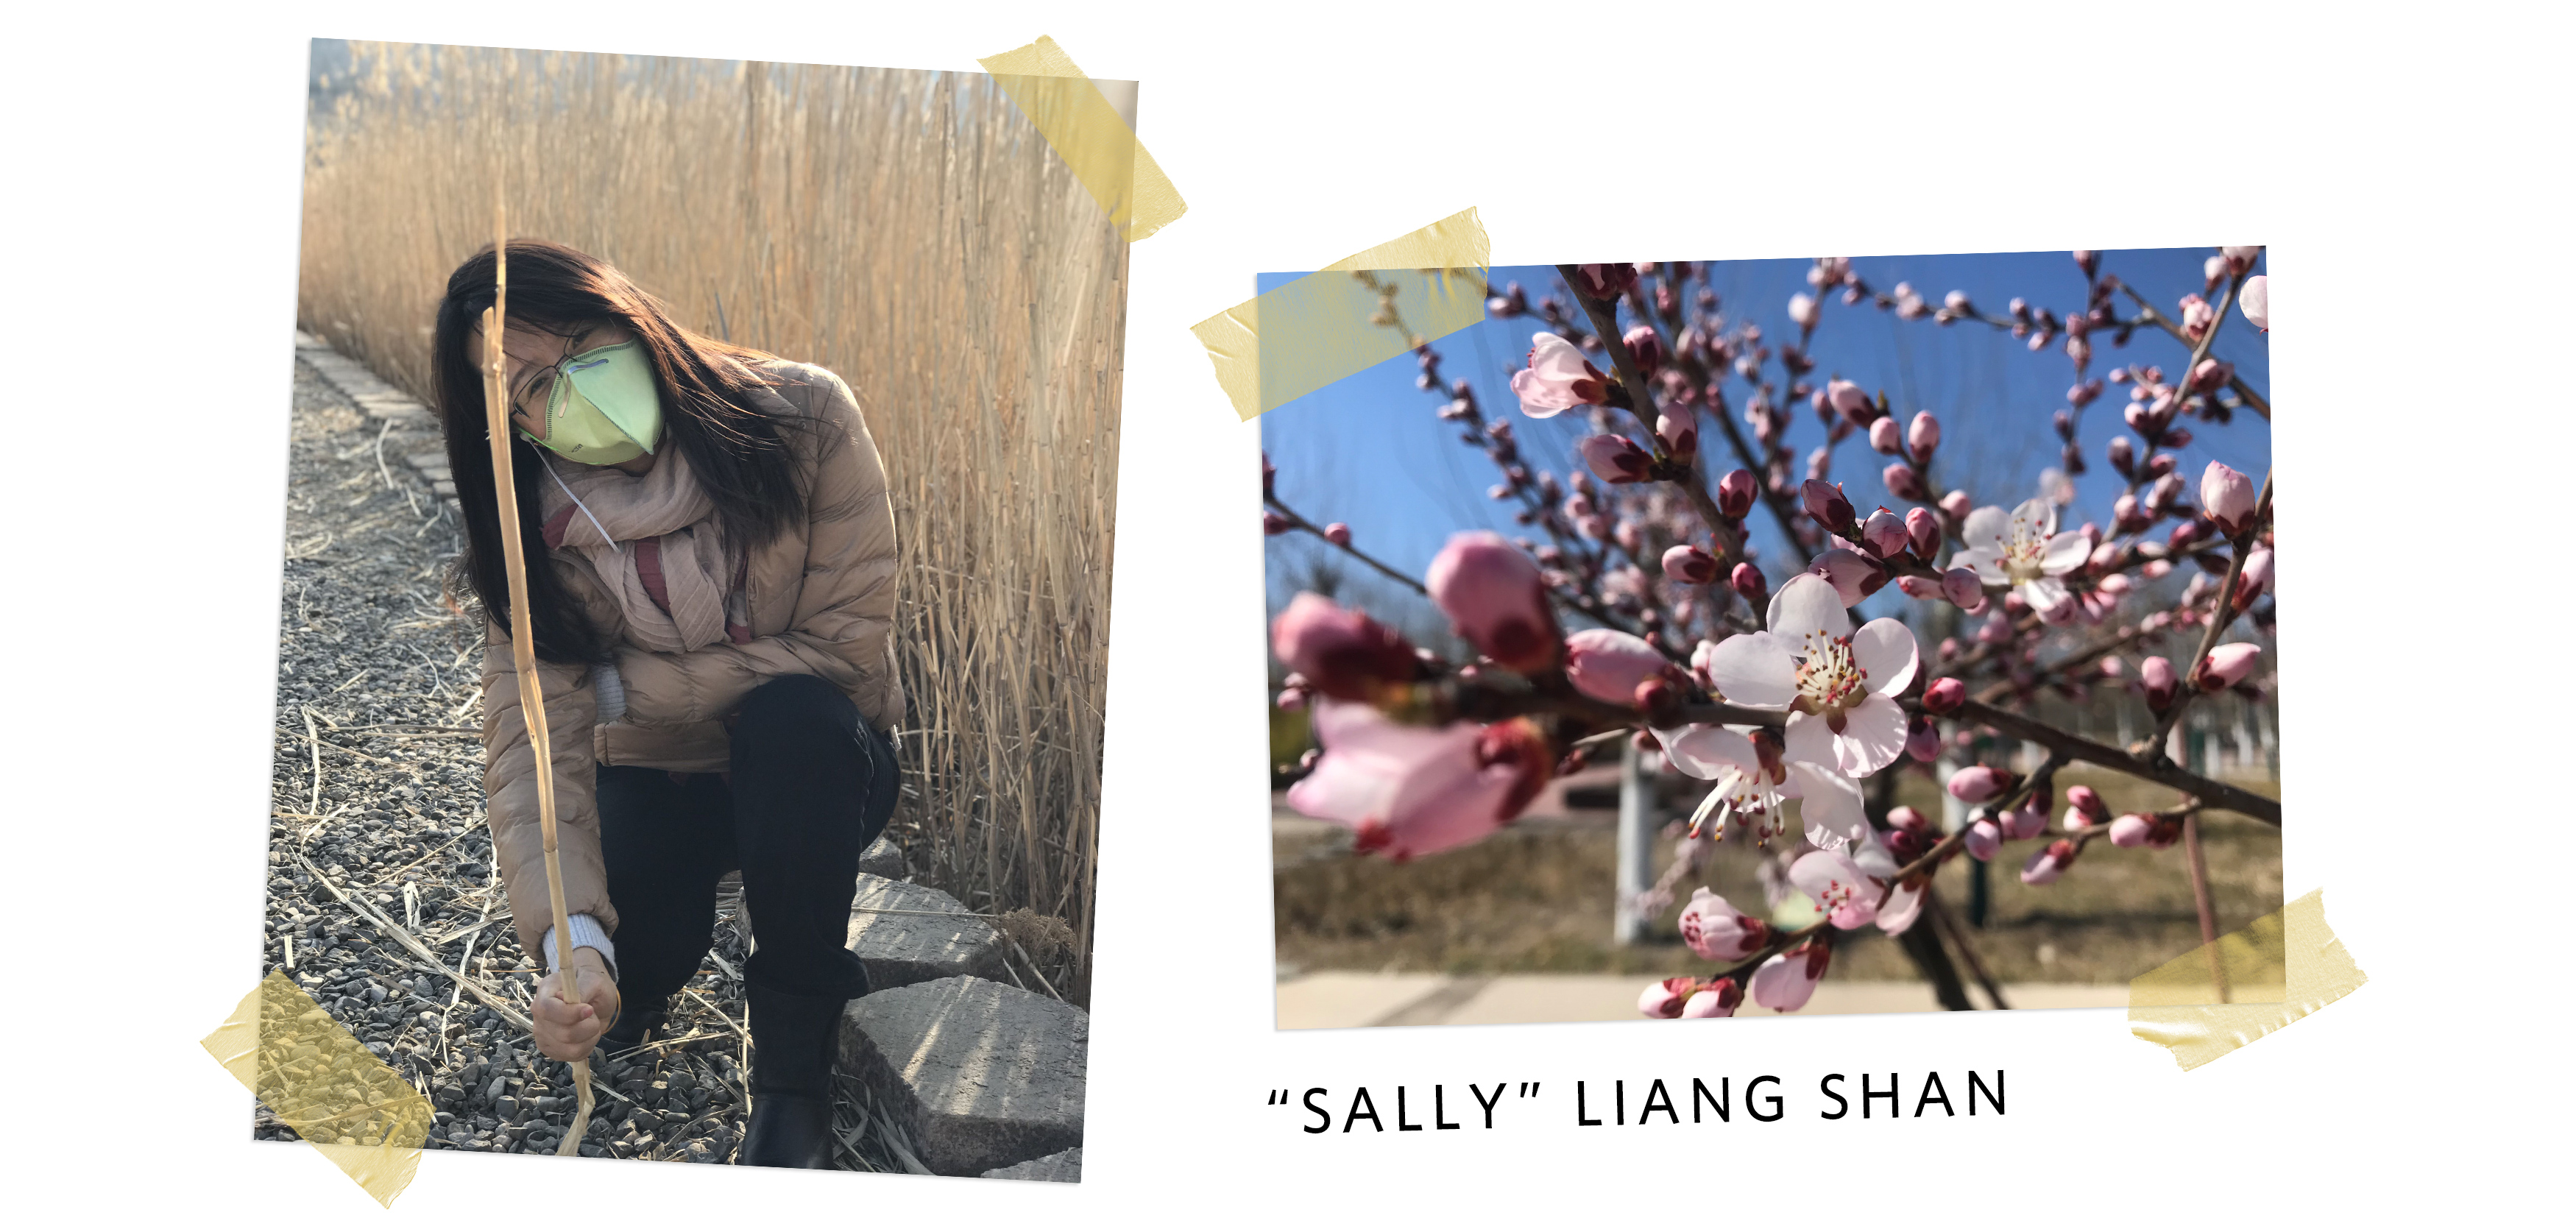 two photos side by side, on the left a woman wearing a mask kneels in a park, on the right is a close up of a cherry blossom branch in bloom. Underneath, text that says 